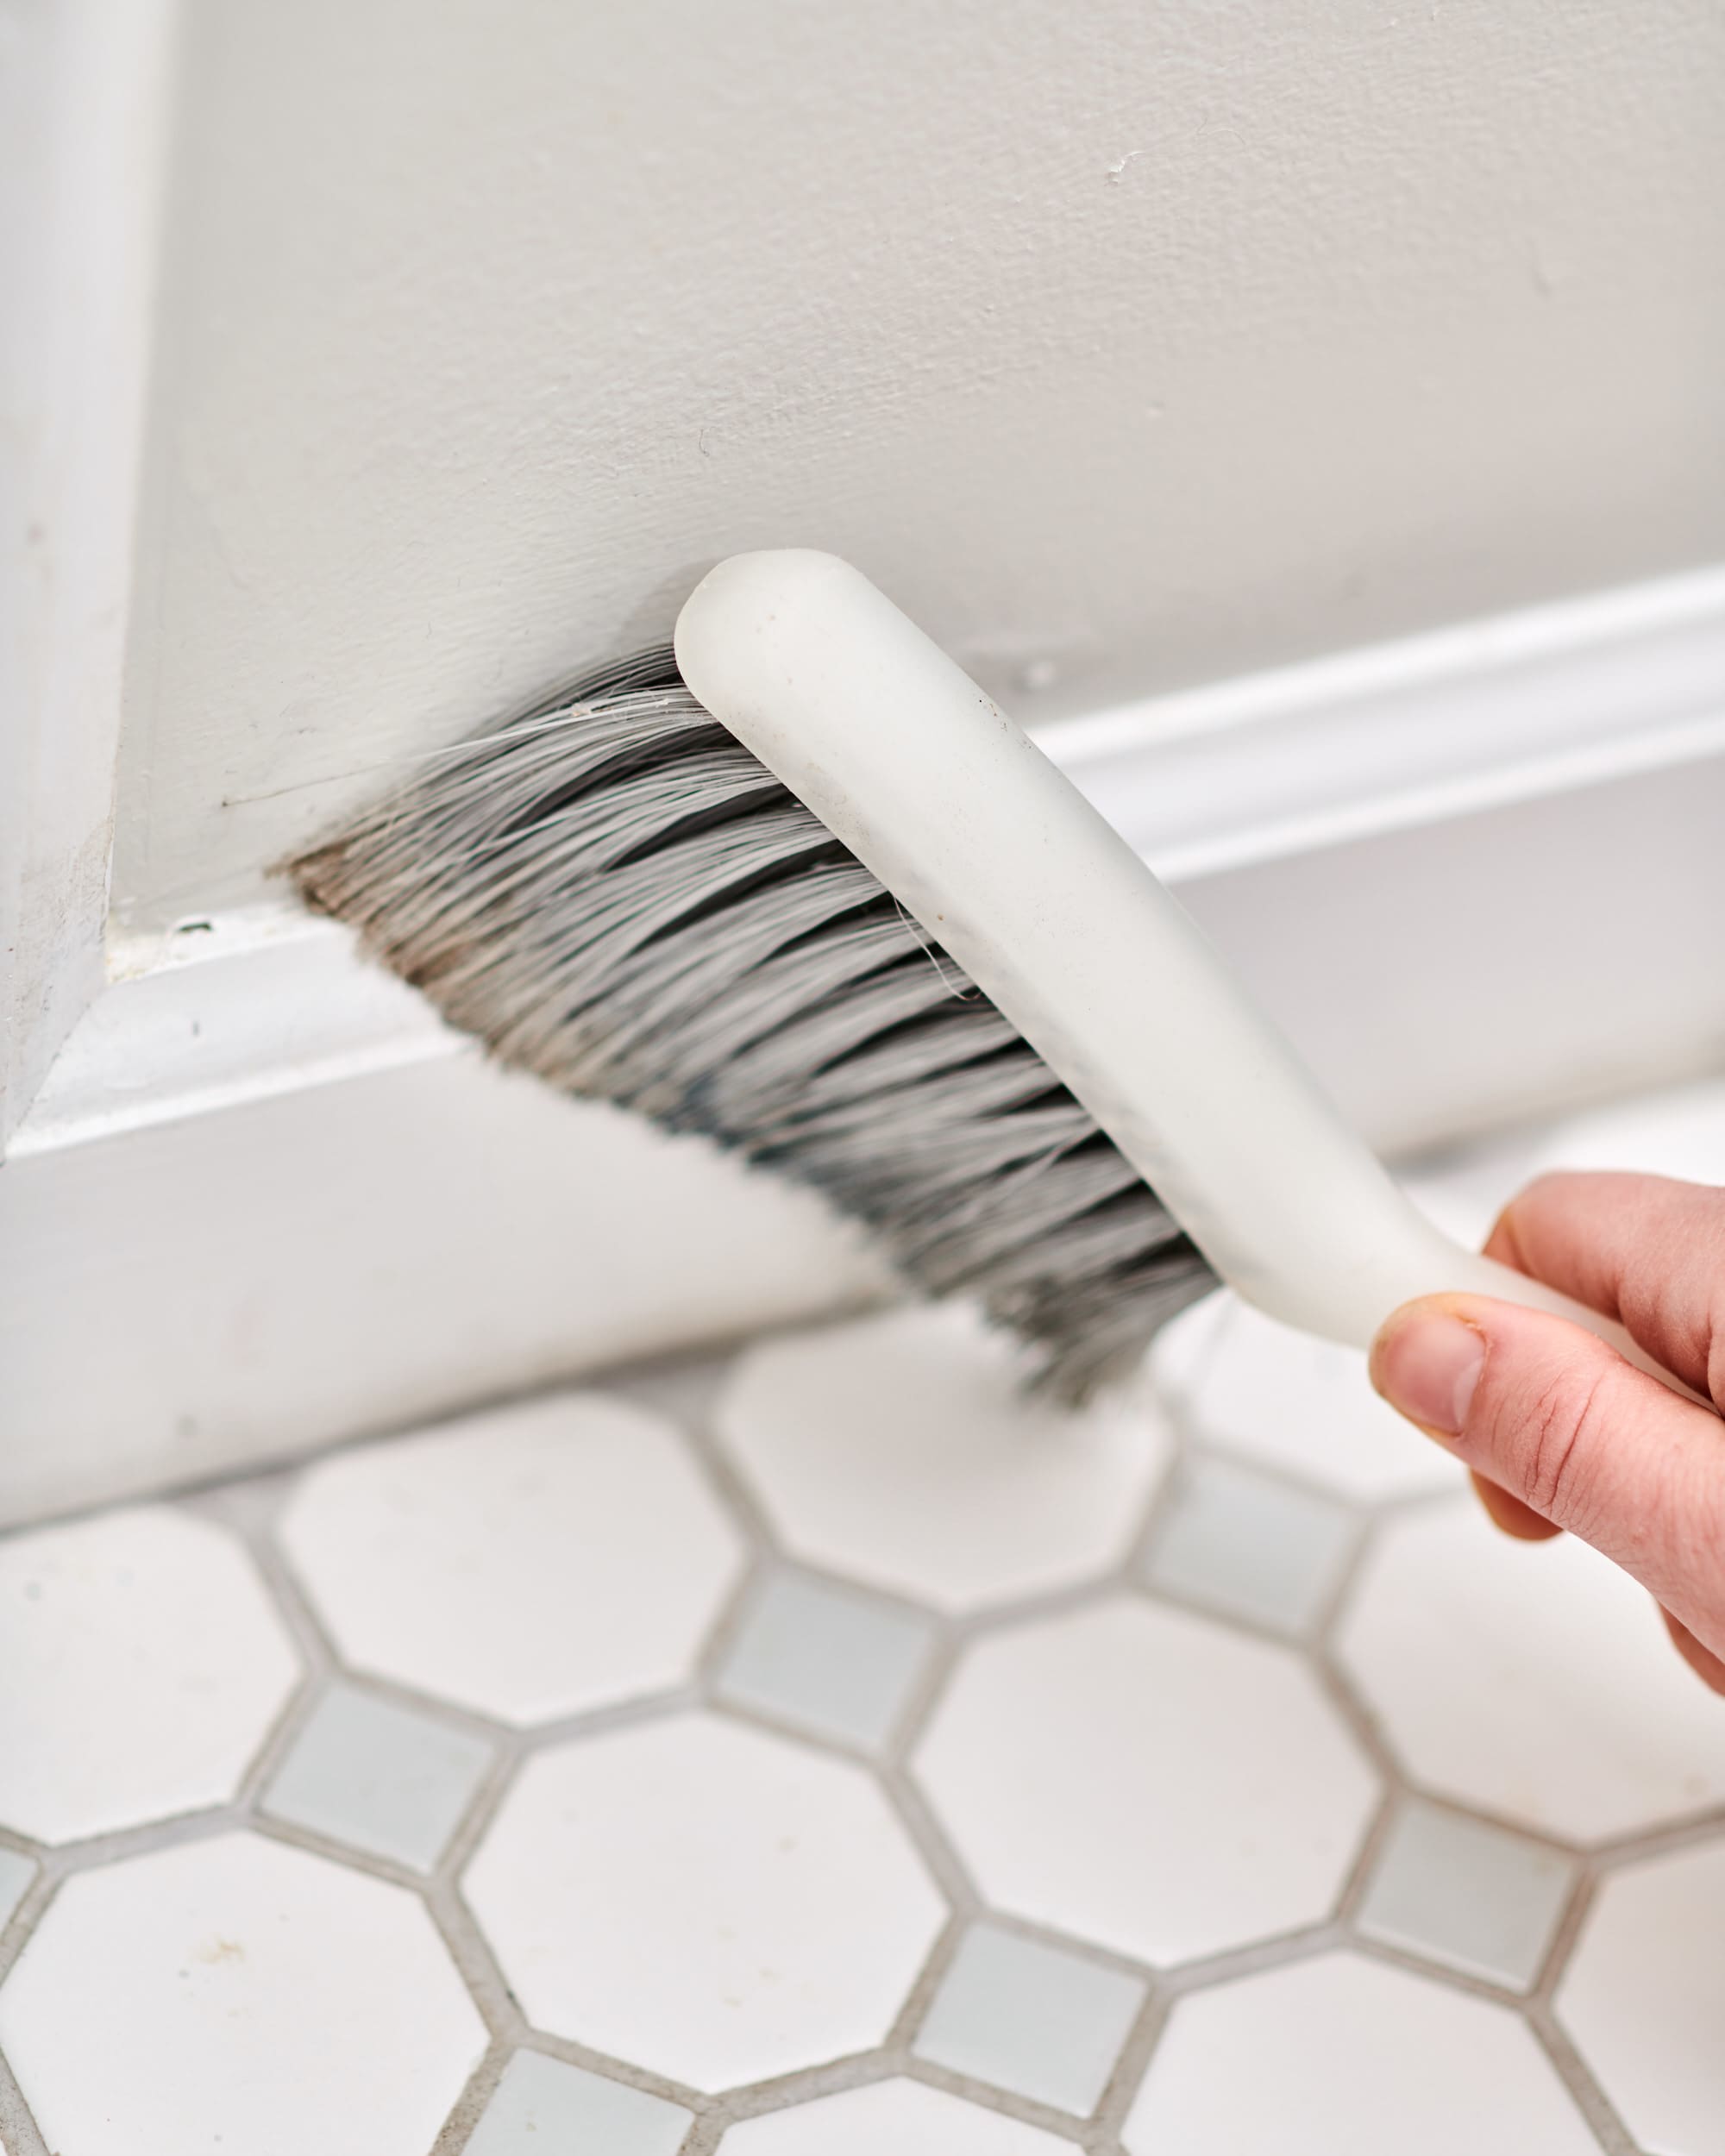 How to Clean Baseboards and Keep them Dust-Free